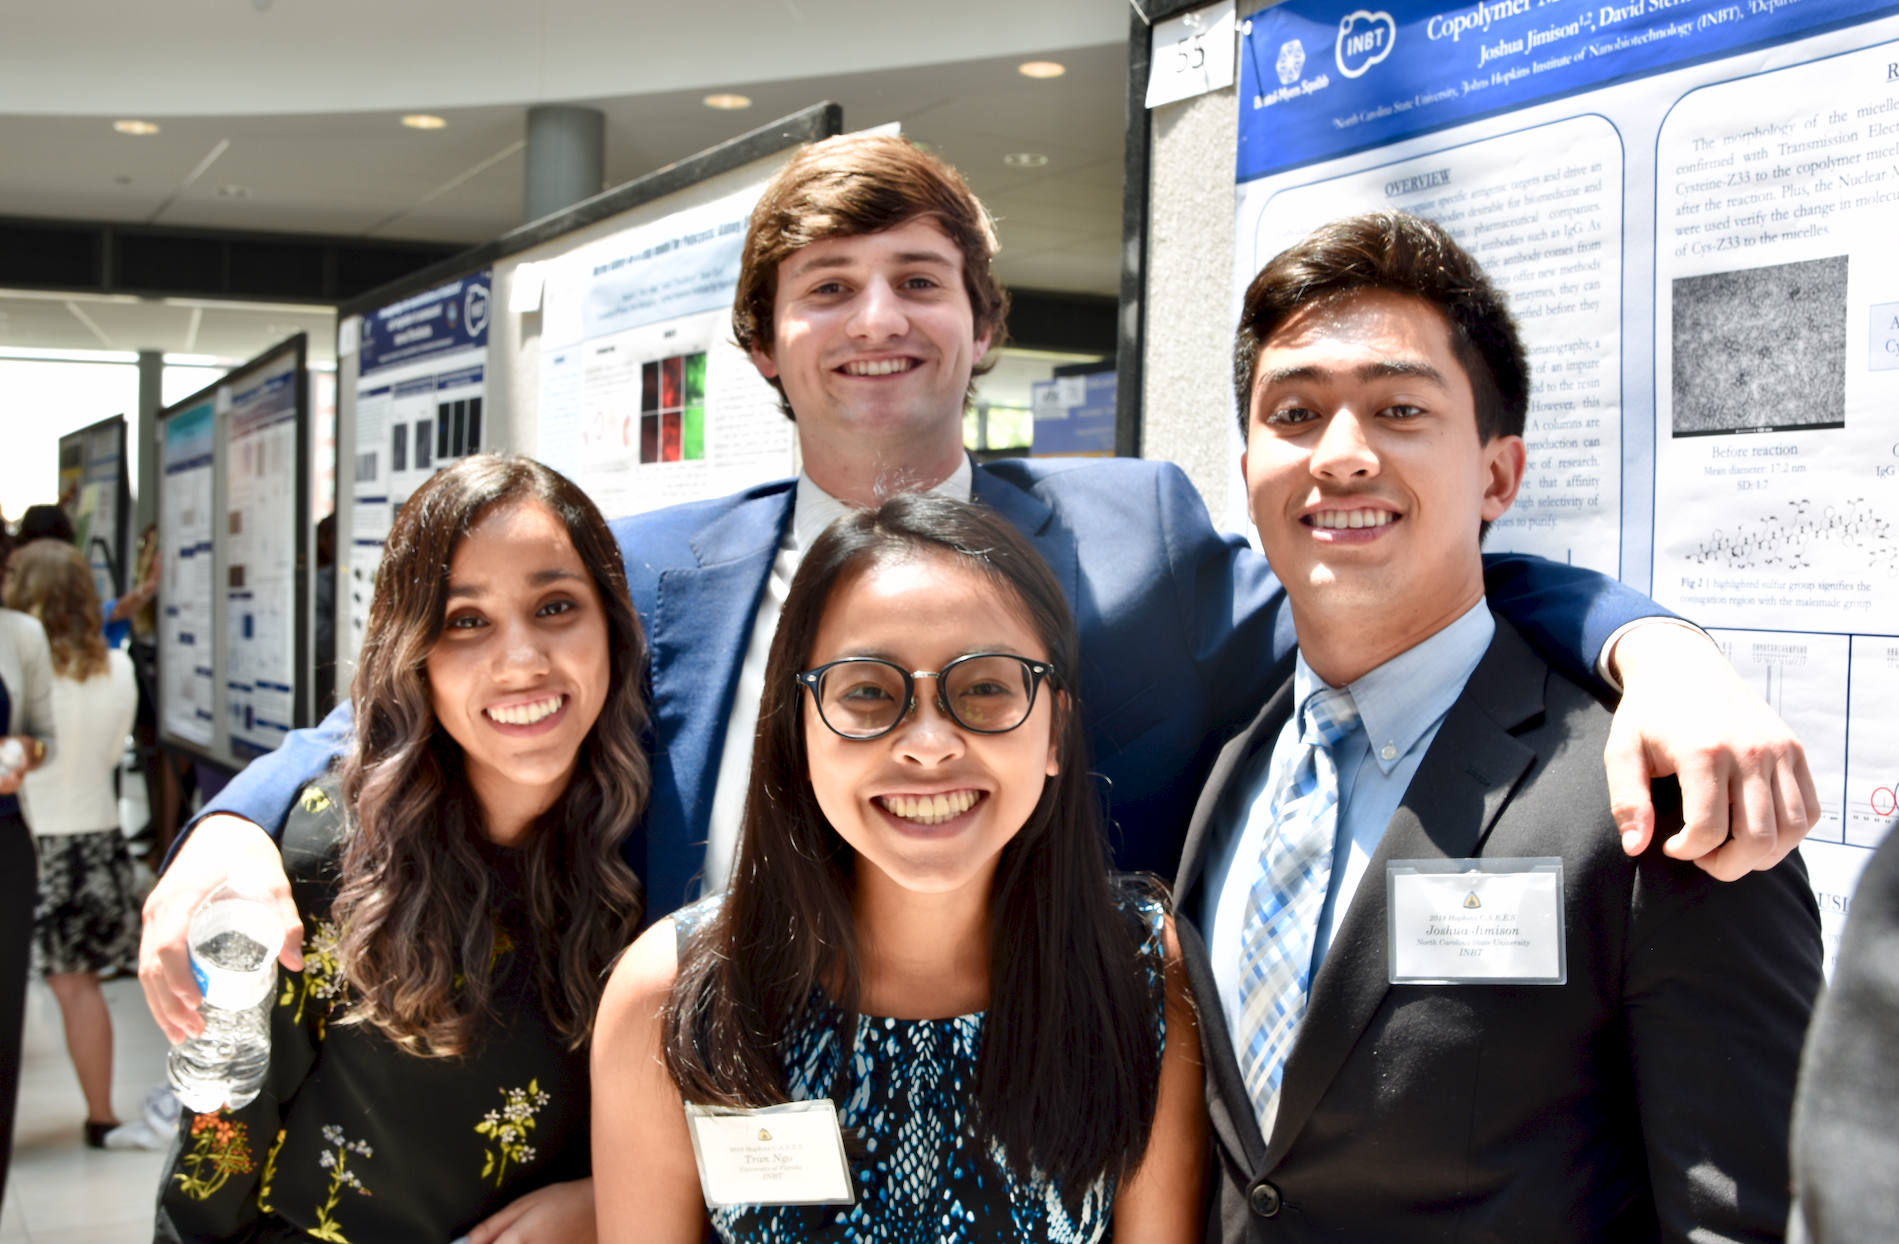 Group photo of four students in formal clothes at the 2018 CARES Symposium. In the background is a row of poster boards with research posters.